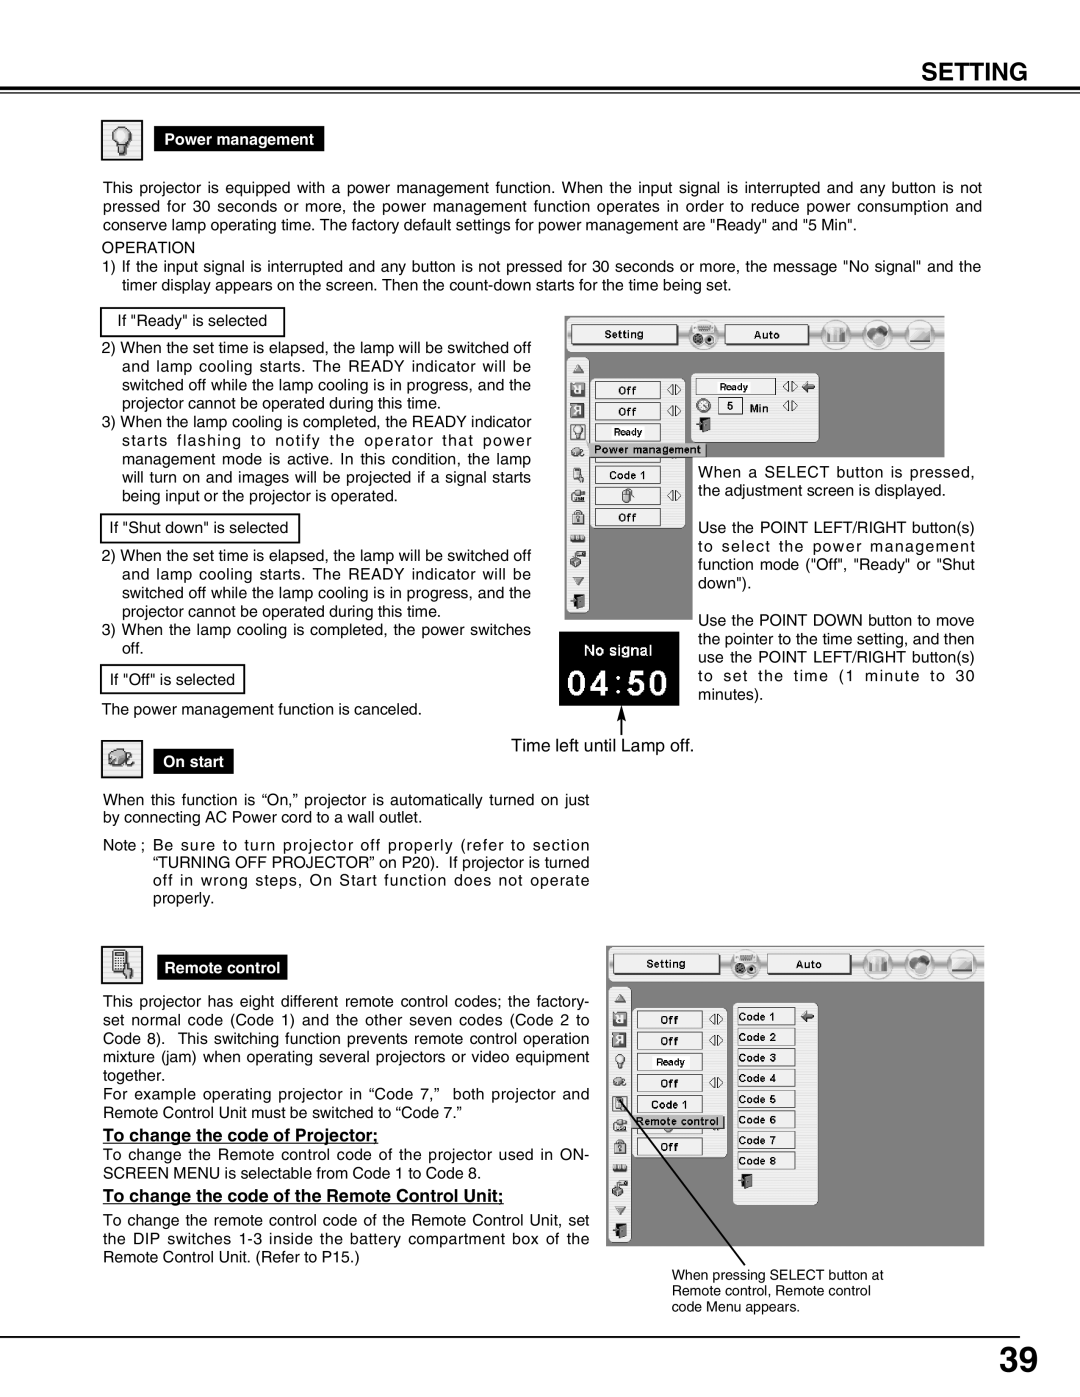 Sanyo PLC-XP50L, XP51L owner manual Setting, Time left until Lamp off, To change the code of Projector 